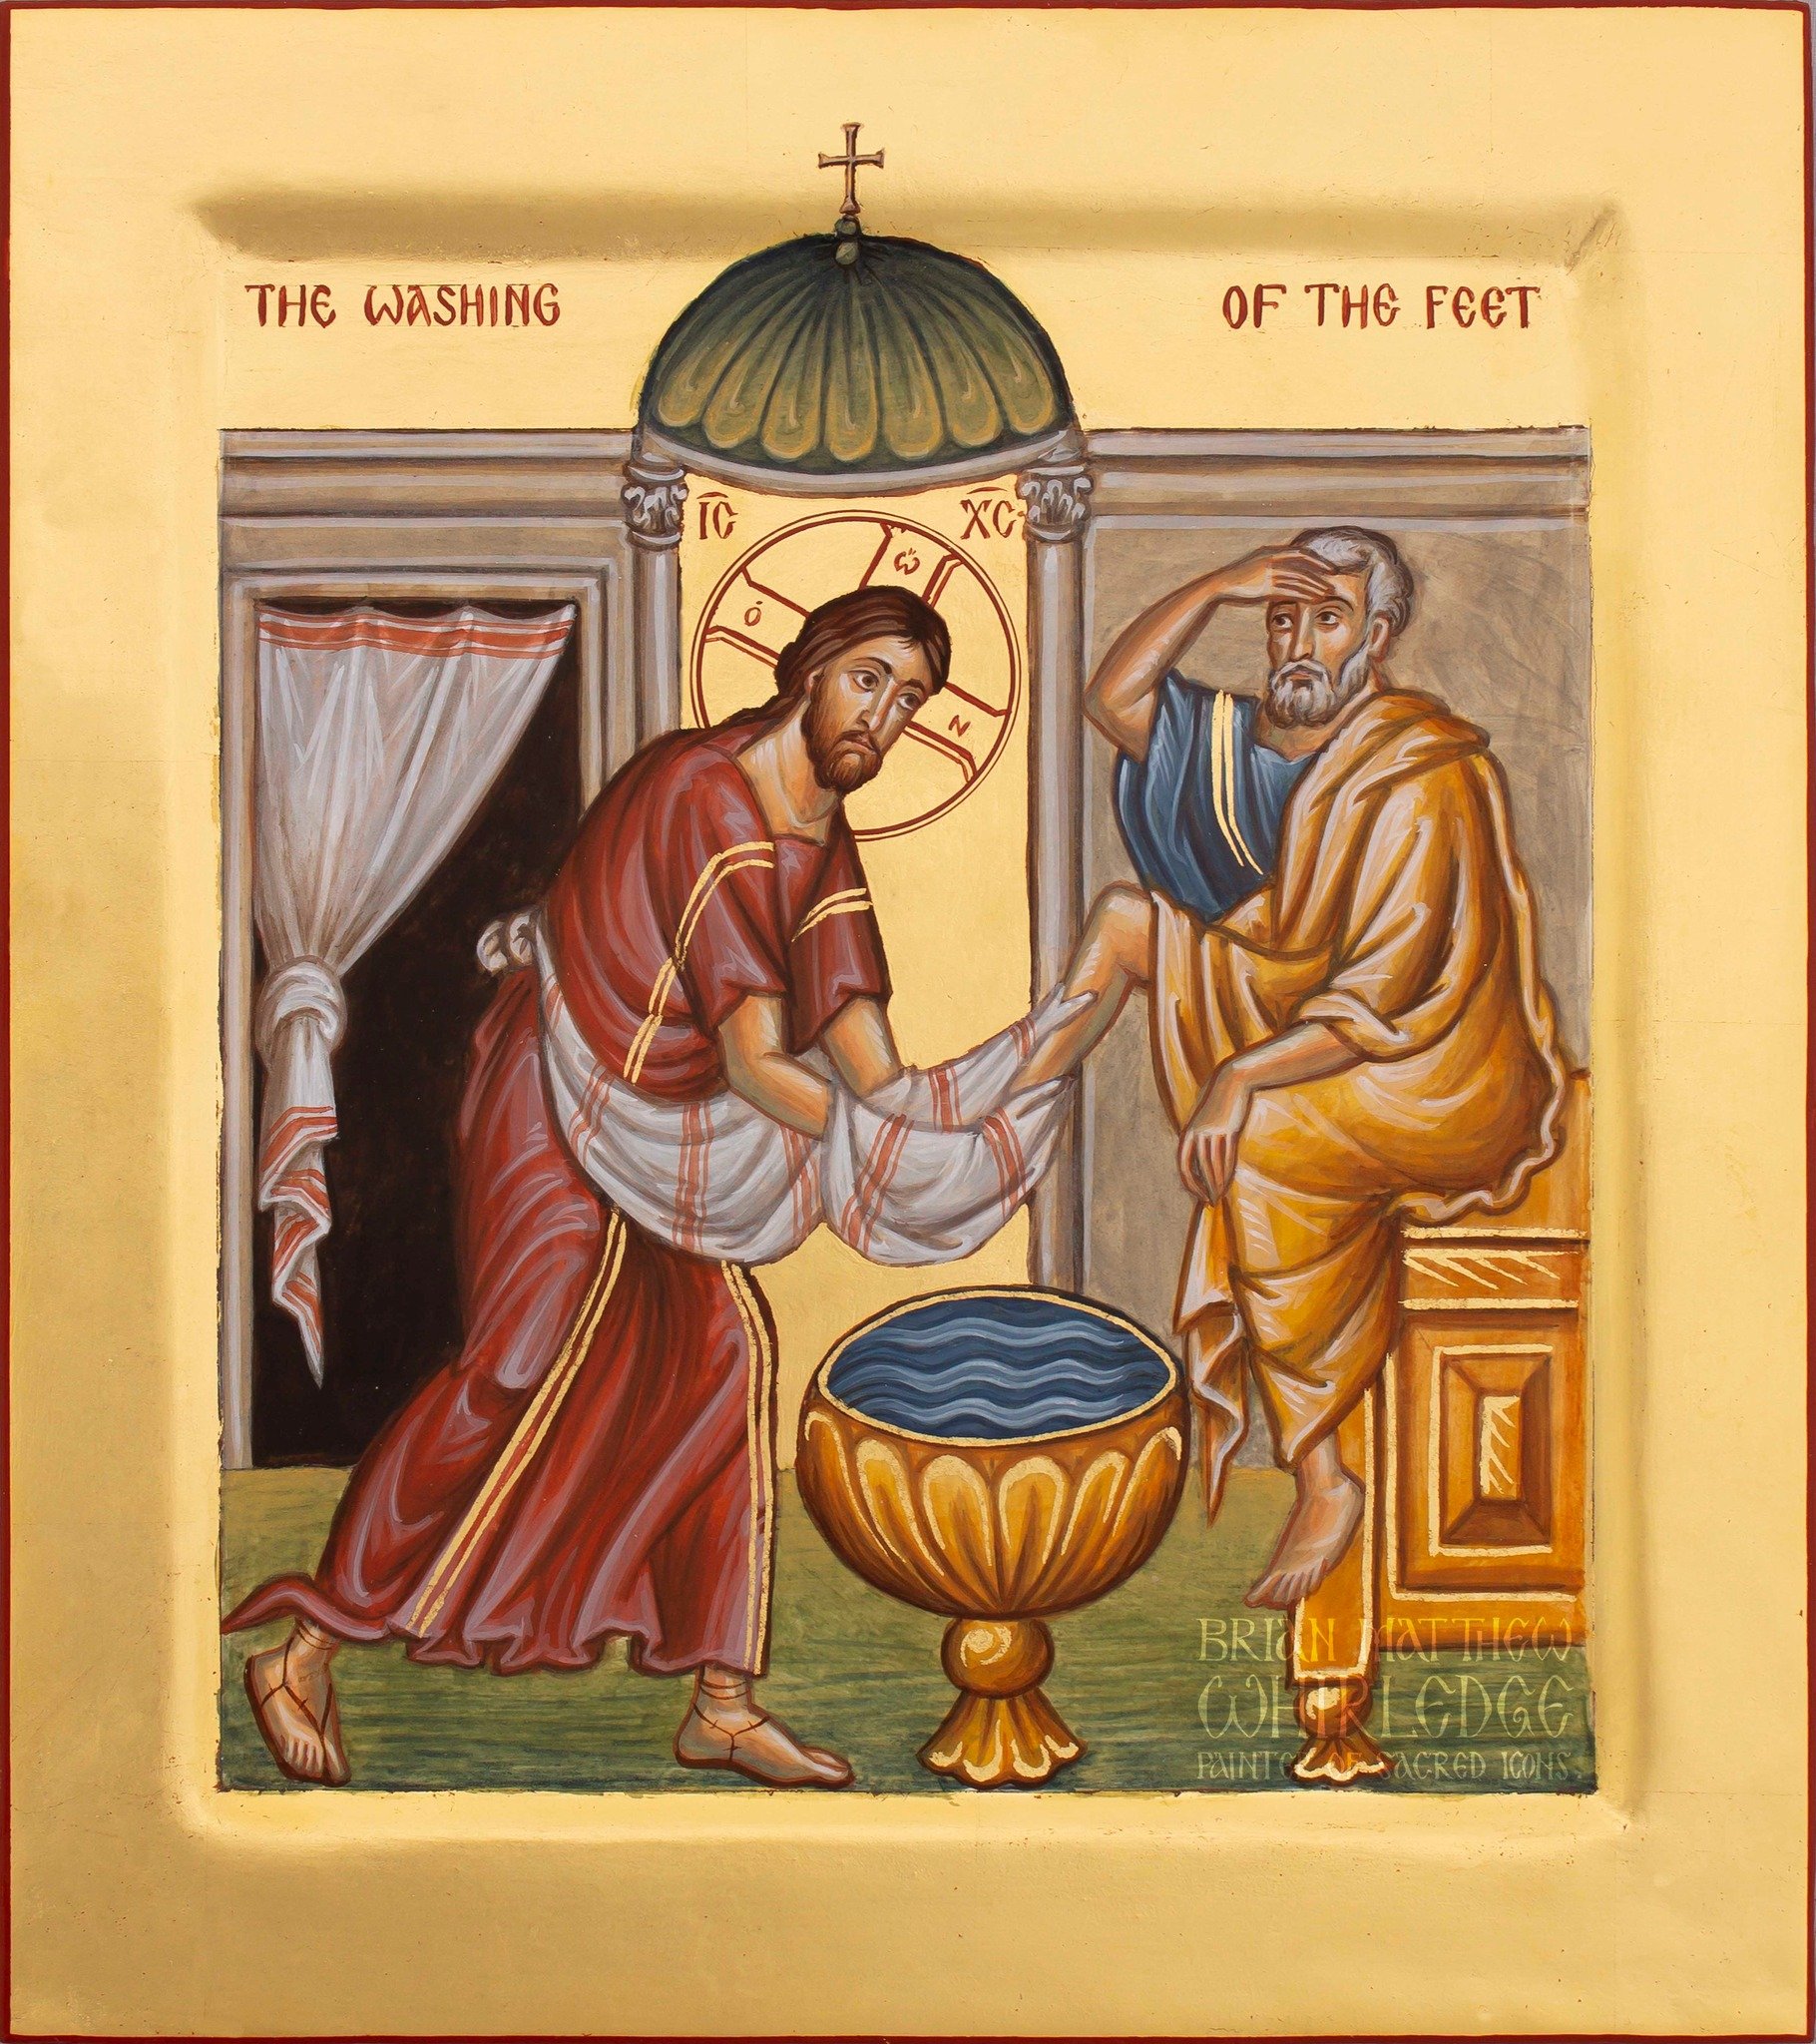 The Lord Washing His Disciples' Feet. Egg tempera and gold on panel. 8x9&quot;
.
&quot;Now before the feast of the Passover, when Jesus knew that his hour had come to depart out of this world to the Father, having loved his own who were in the world,